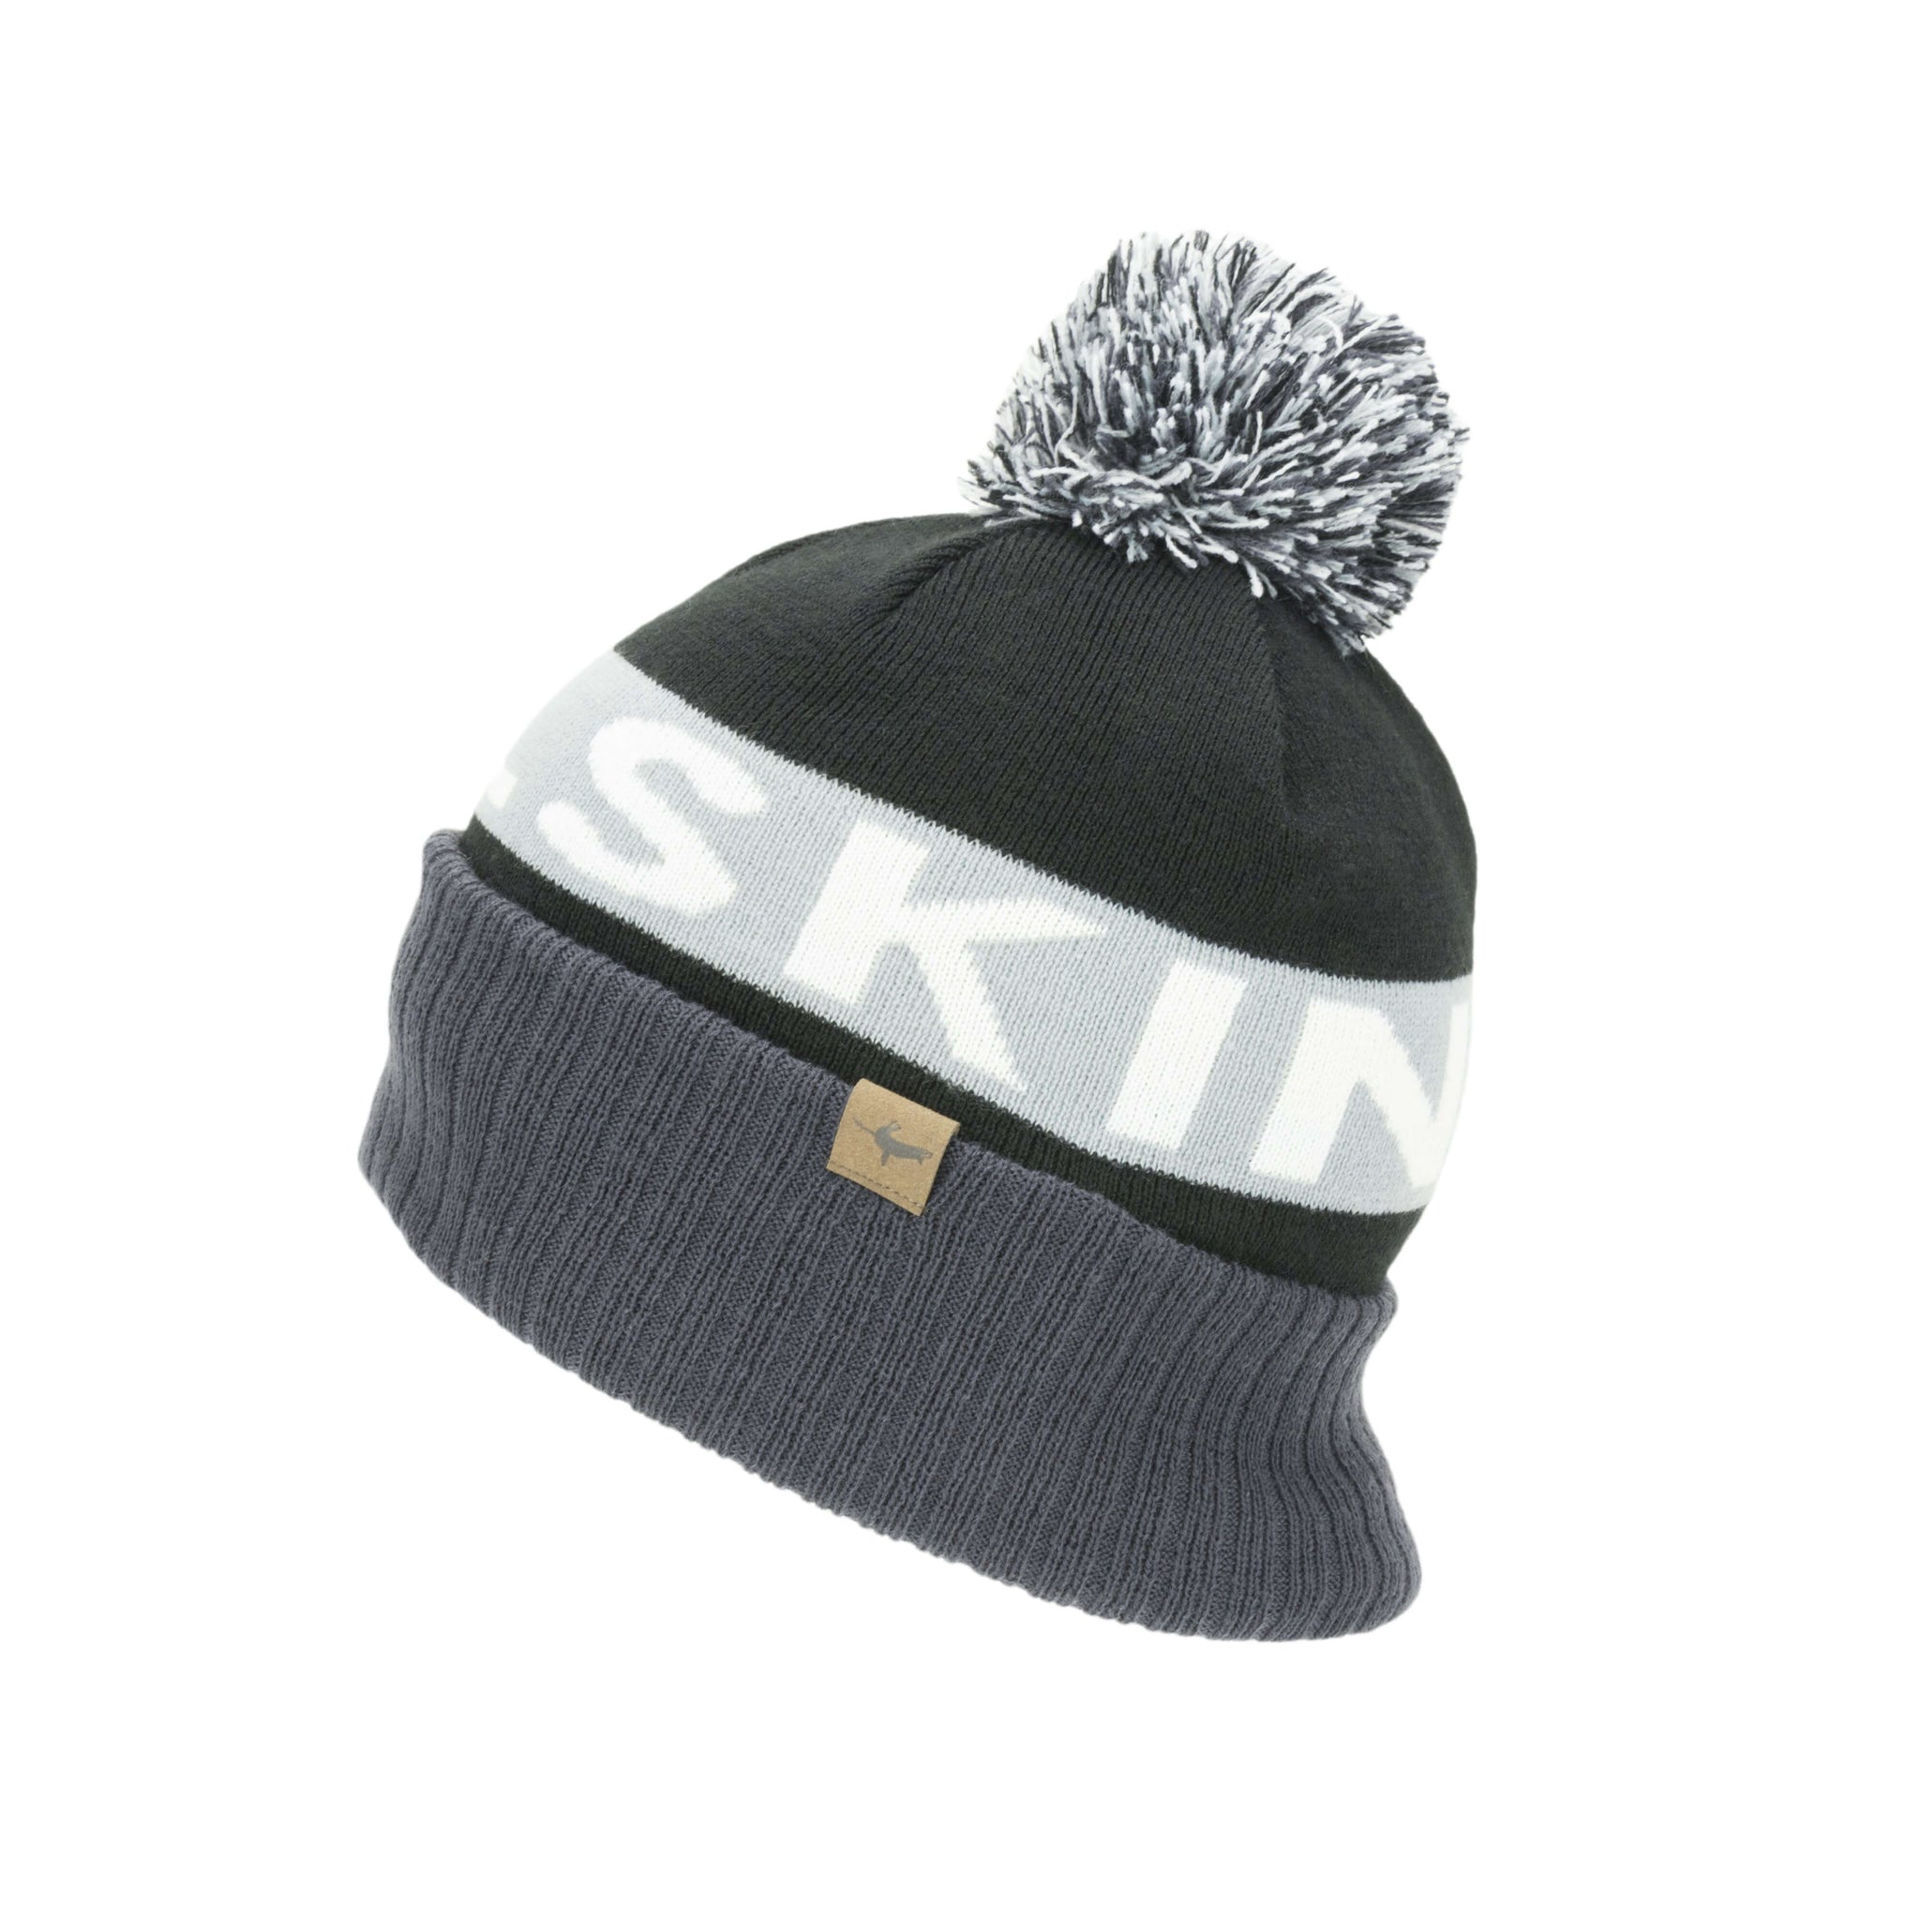 Sealskinz Water Resistant Cold Weather Bobble Hat in Black / Grey / White / Black